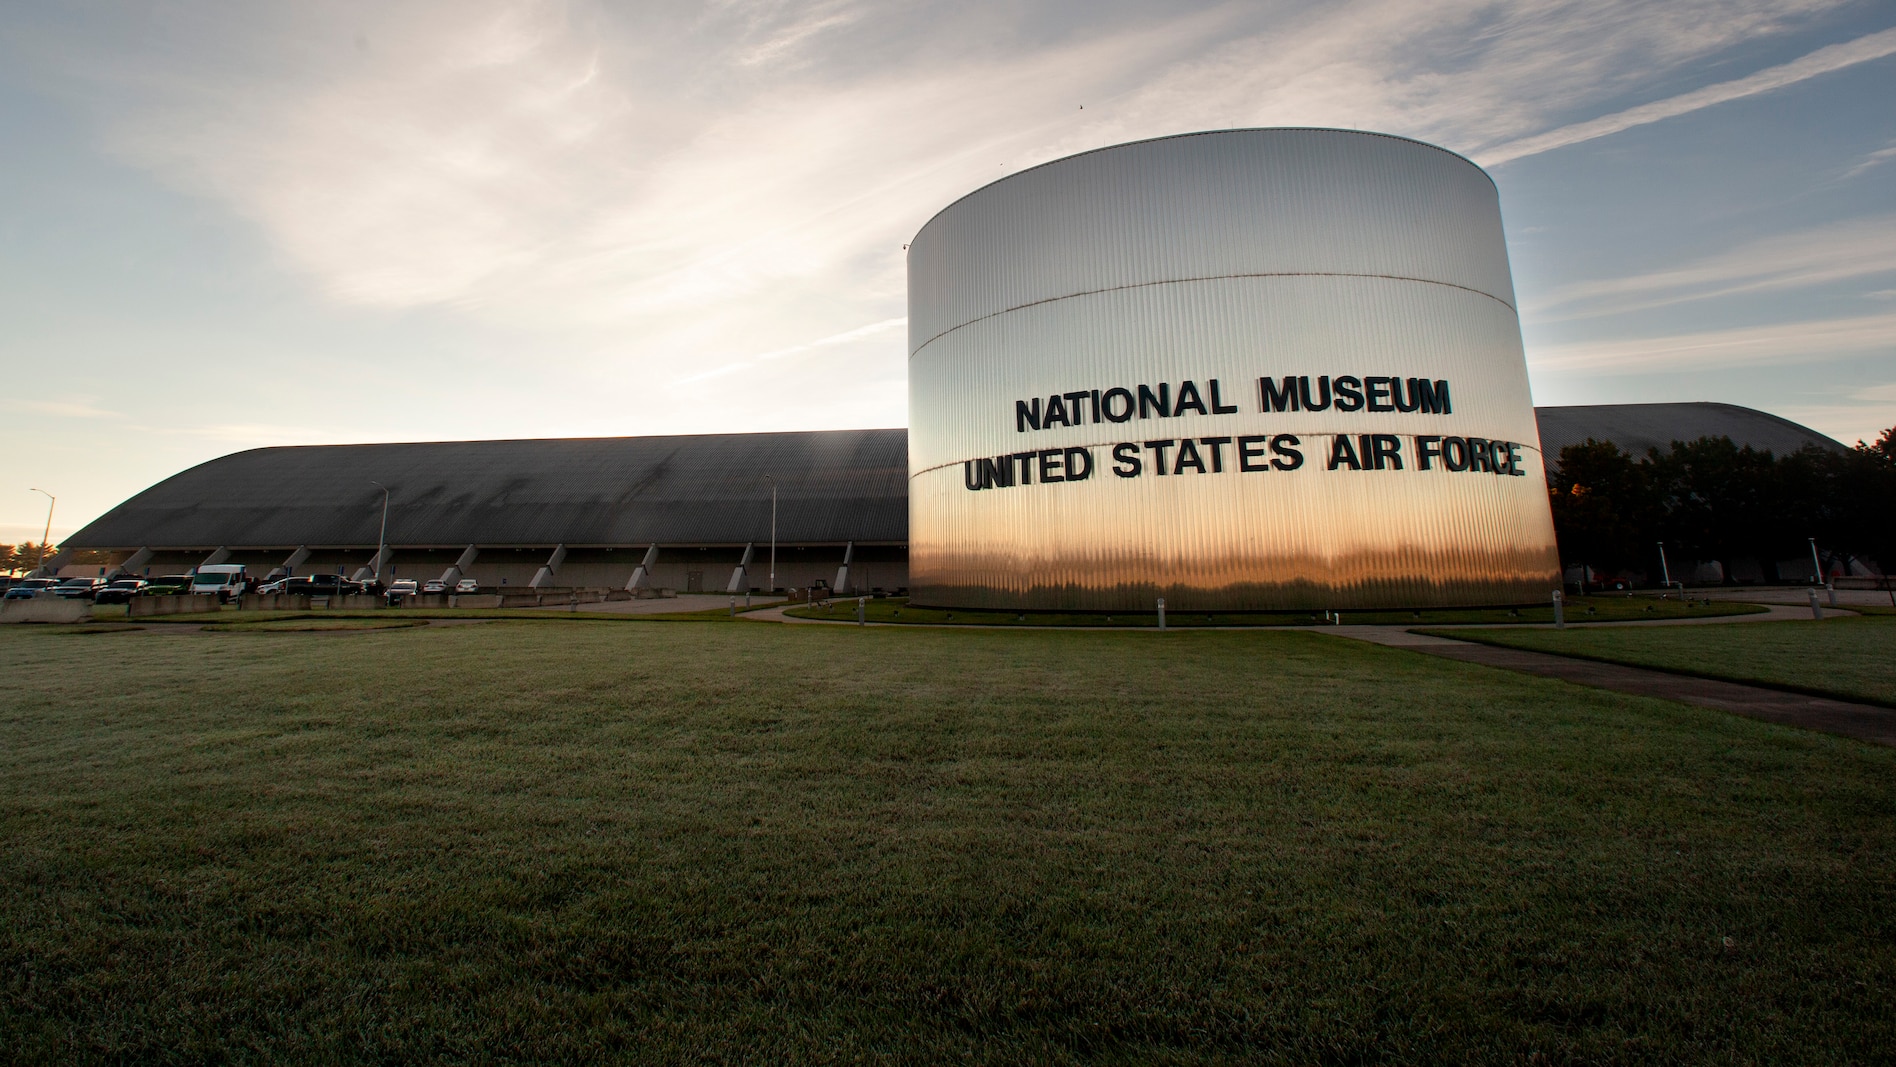 exterior view of the National Museum of the U.S. Air Force